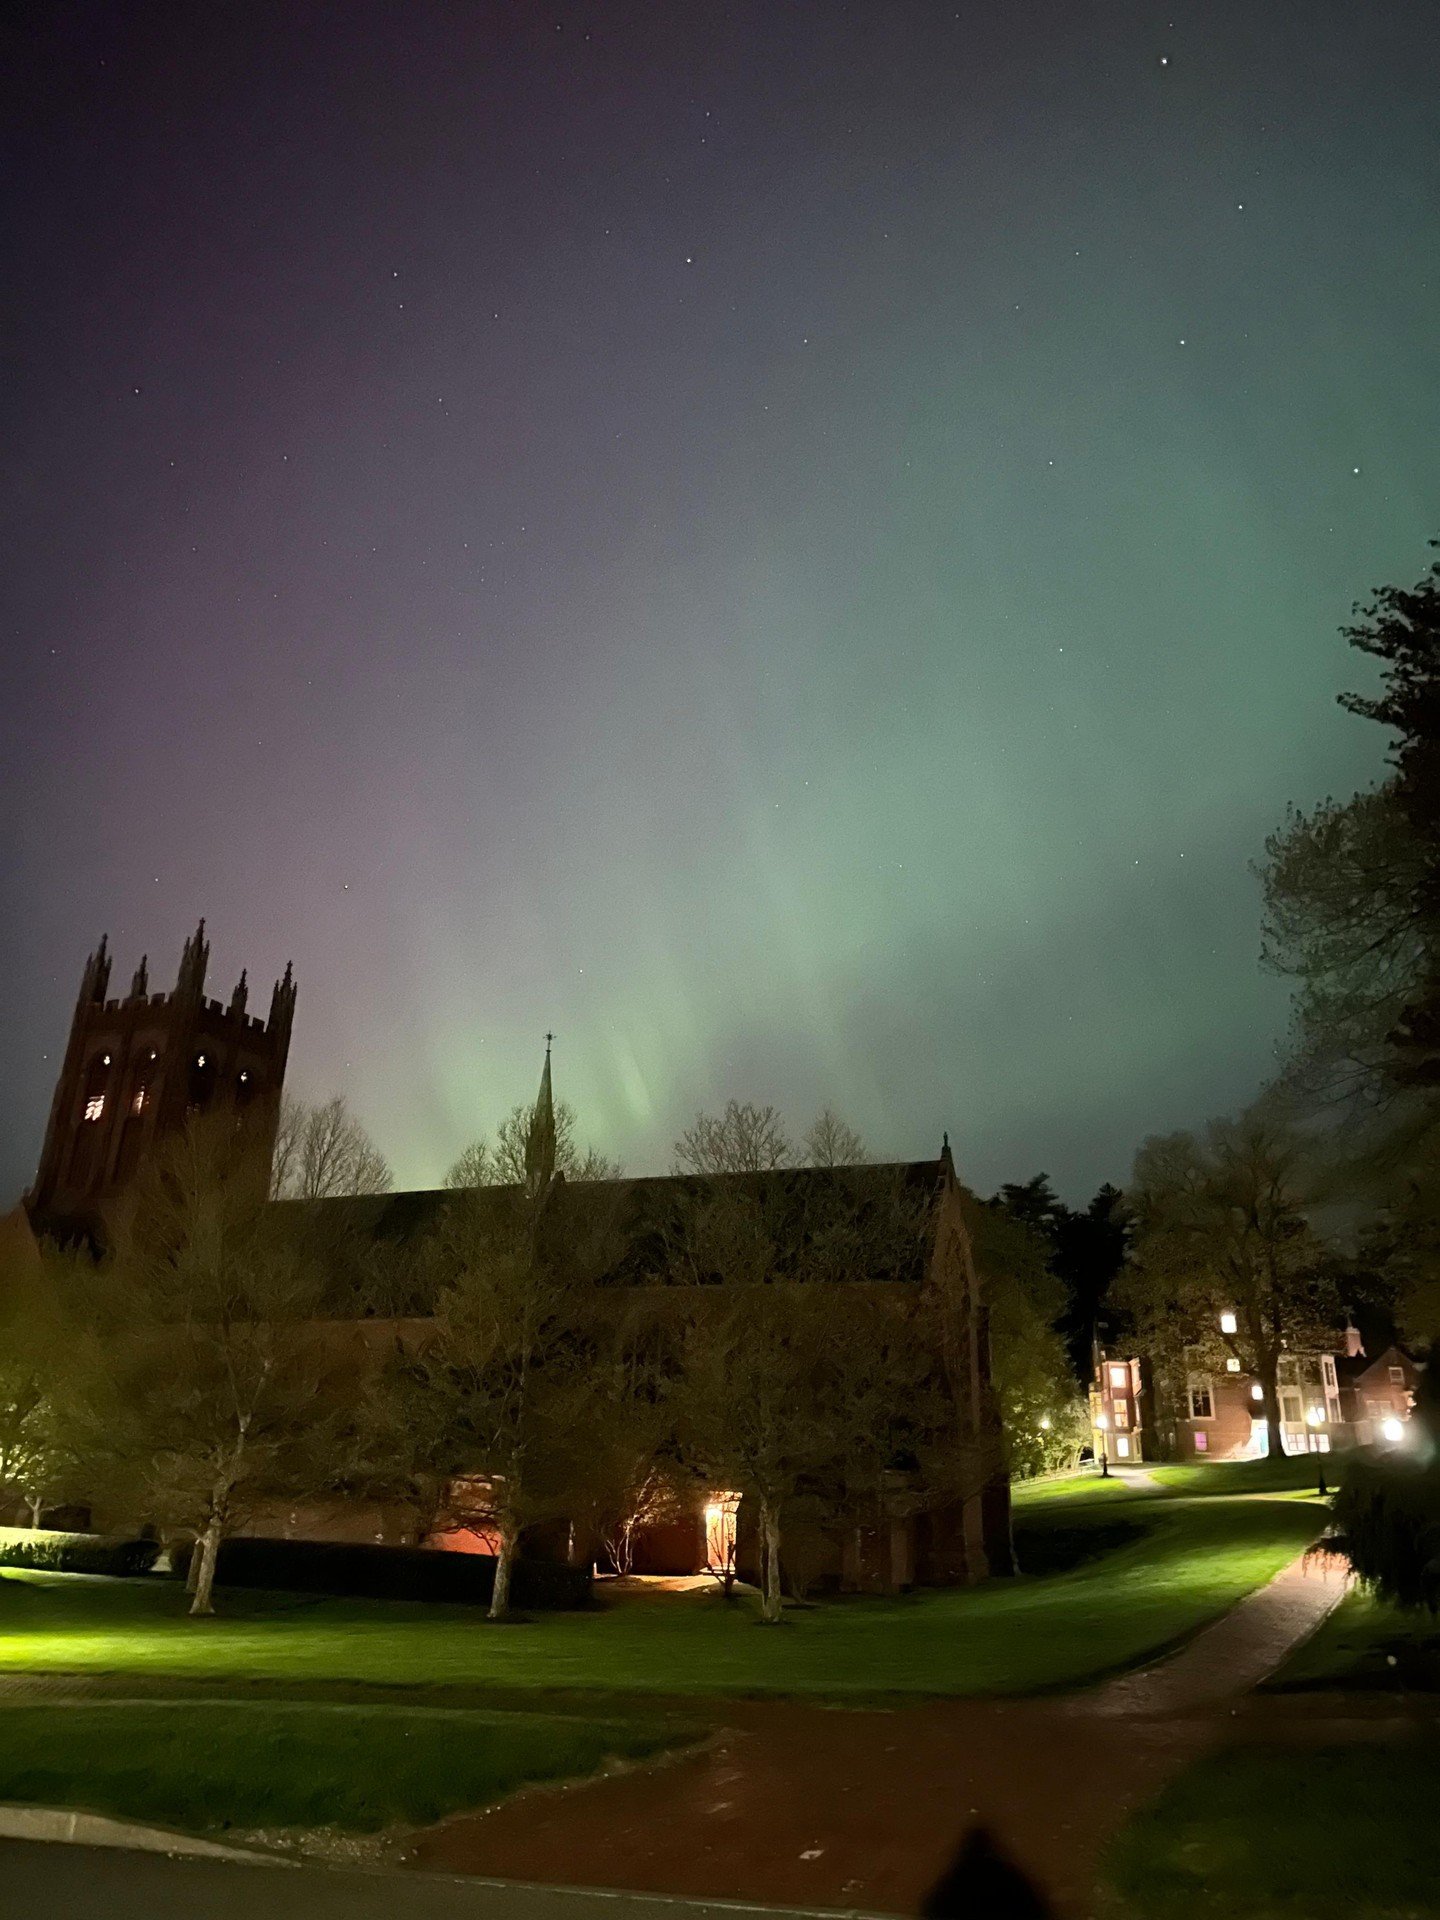 Over the weekend, students and faculty had the opportunity to witness a breathtaking display of nature &mdash; the aurora borealis! Thanks to an unusually powerful solar storm, this incredible light show was visible in the night sky above Millville, 